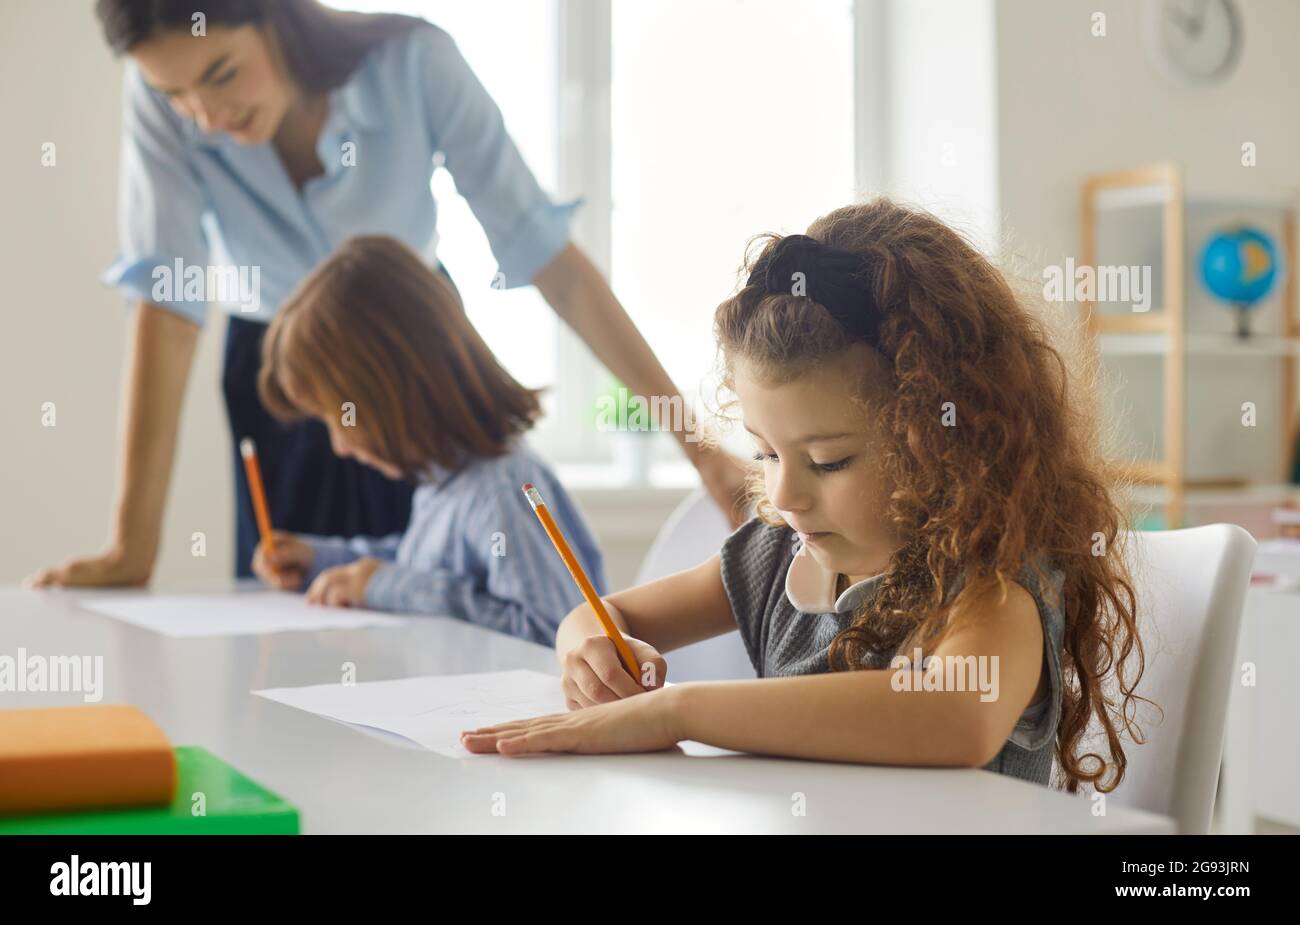 Close up of little schoolgirl intently writing or drawing while sitting at a desk in class. Stock Photo